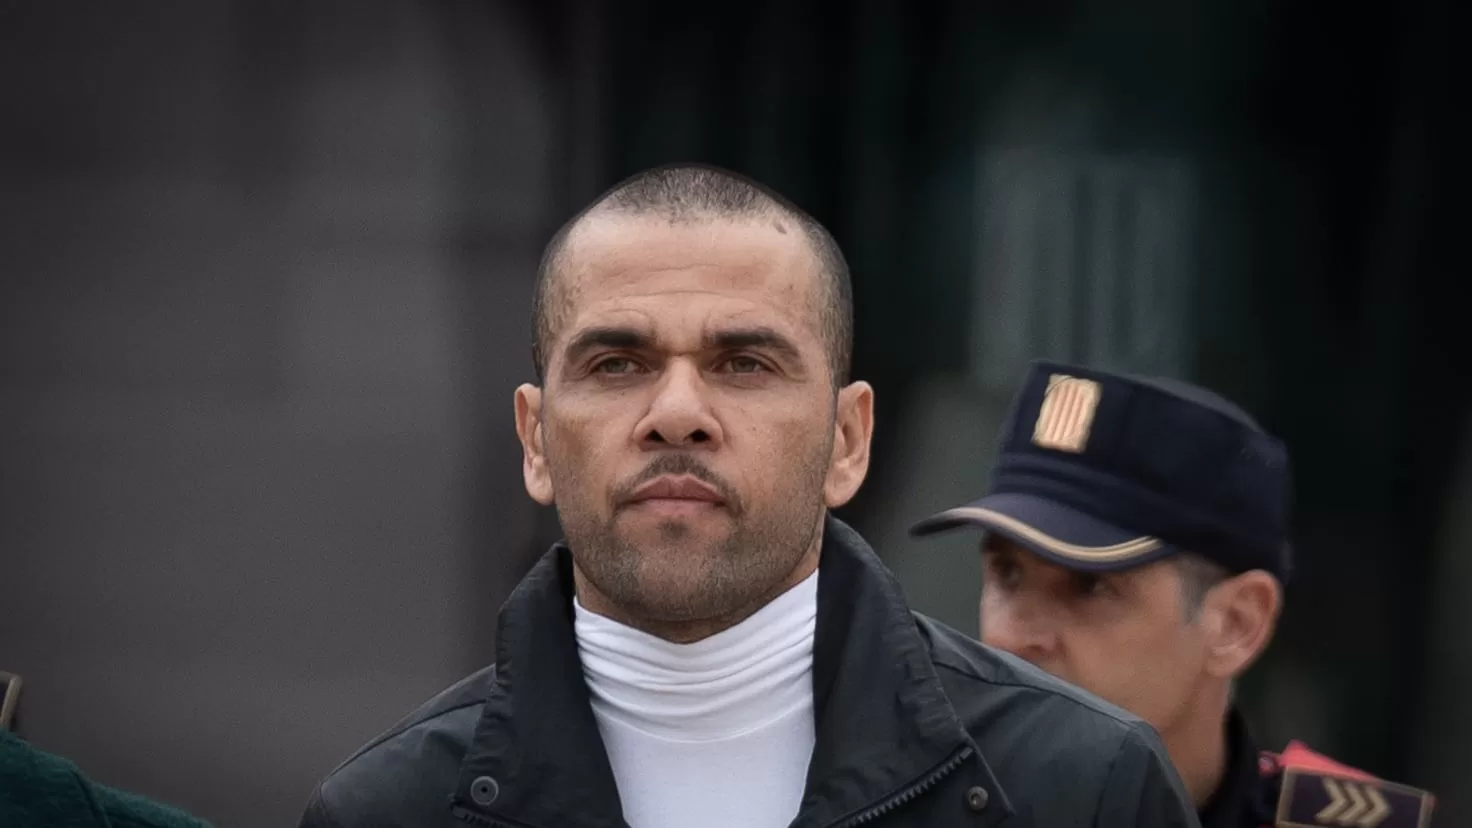 La Manada's lawyer, on the Dani Alves case: The condition of innocence must continue to be preached to him
